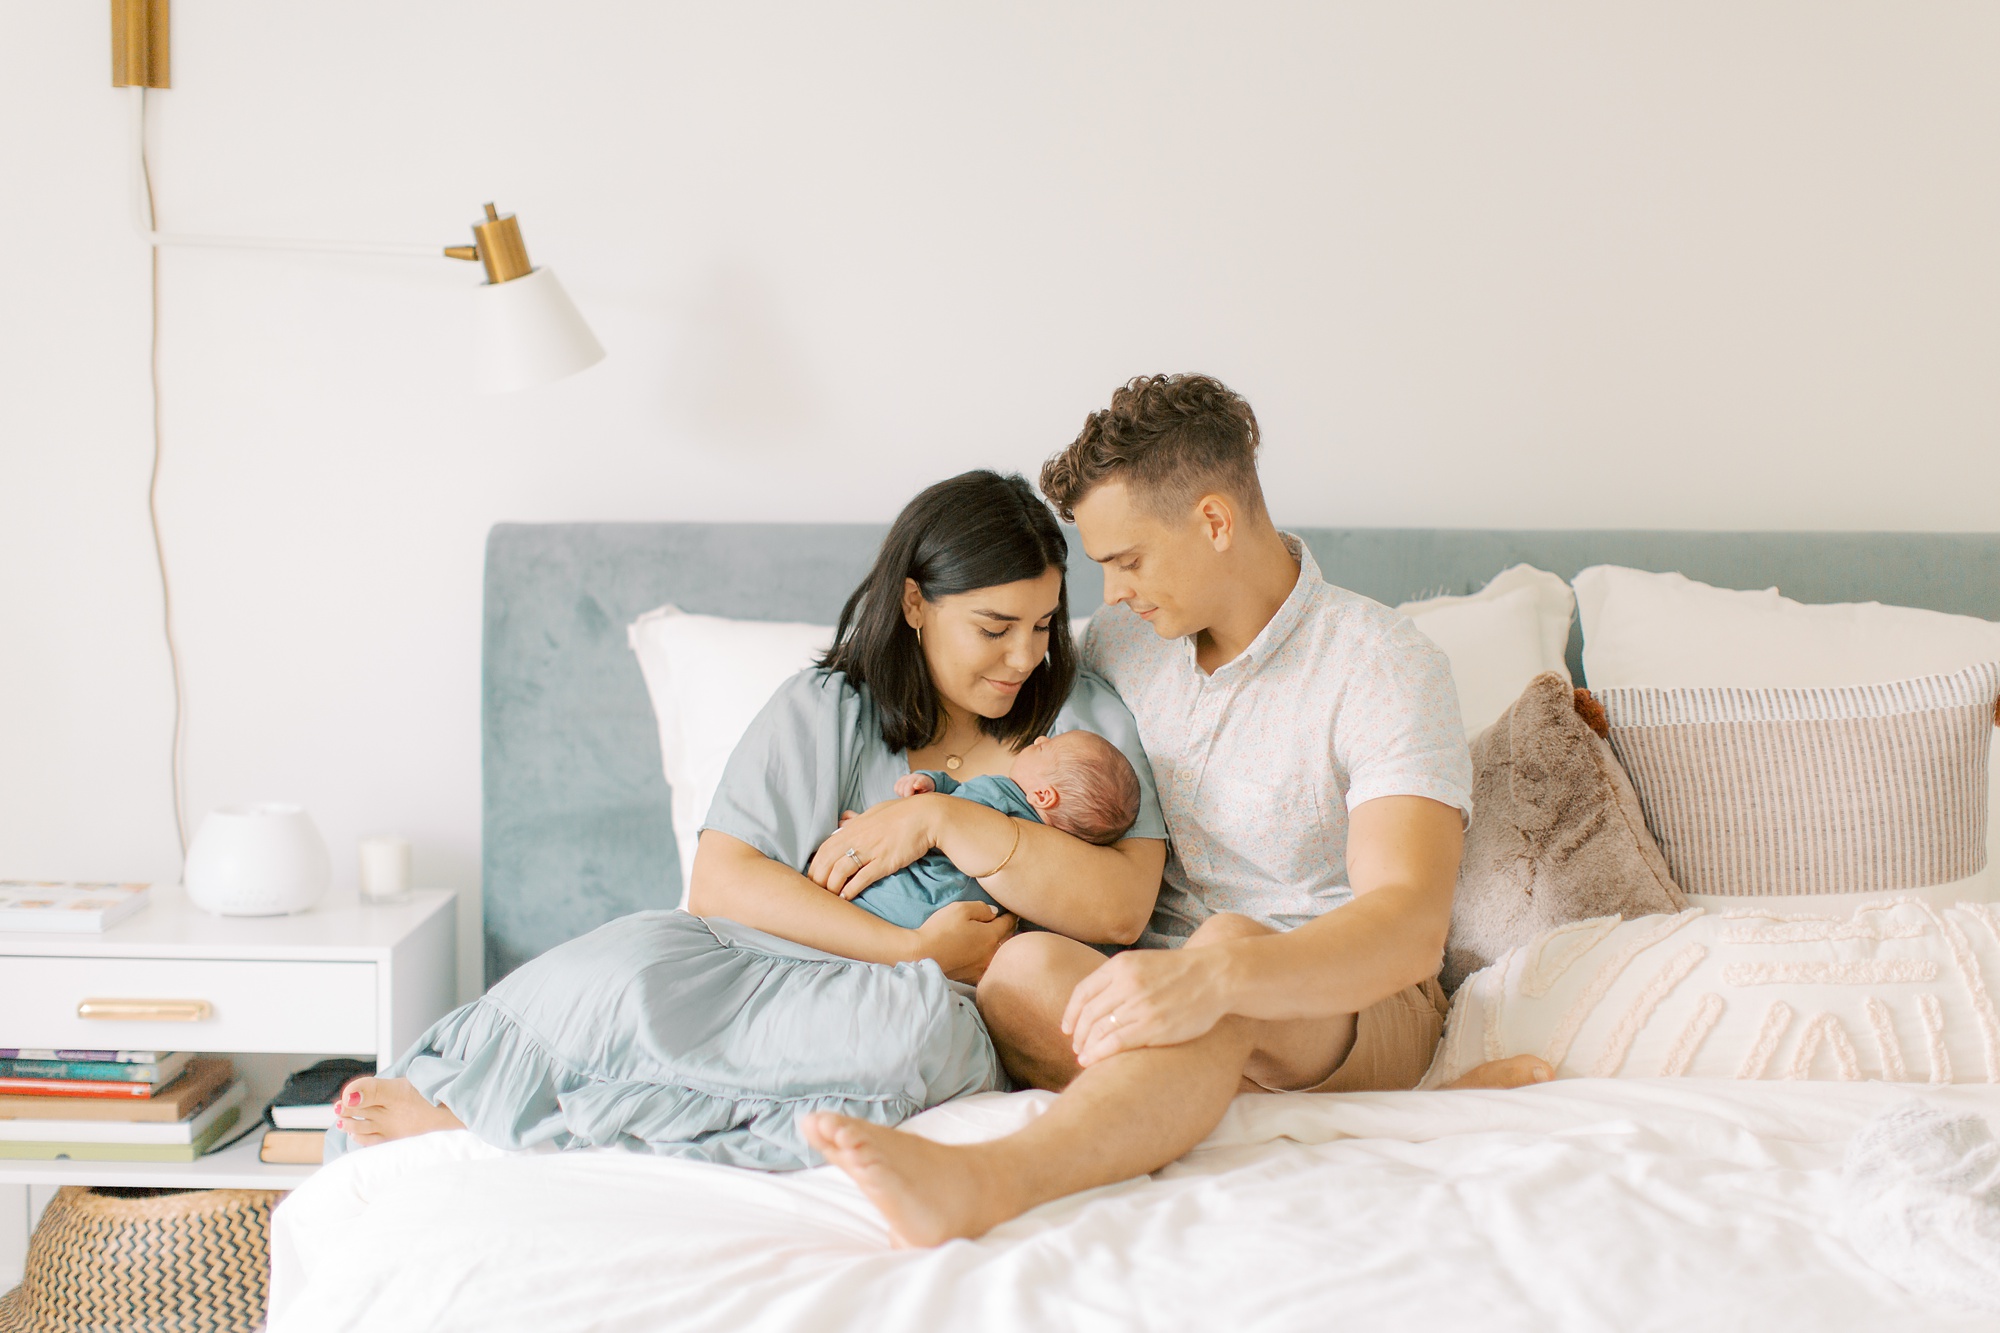 mom and dad sit on bed with white sheets holding new baby boy in blue wrap